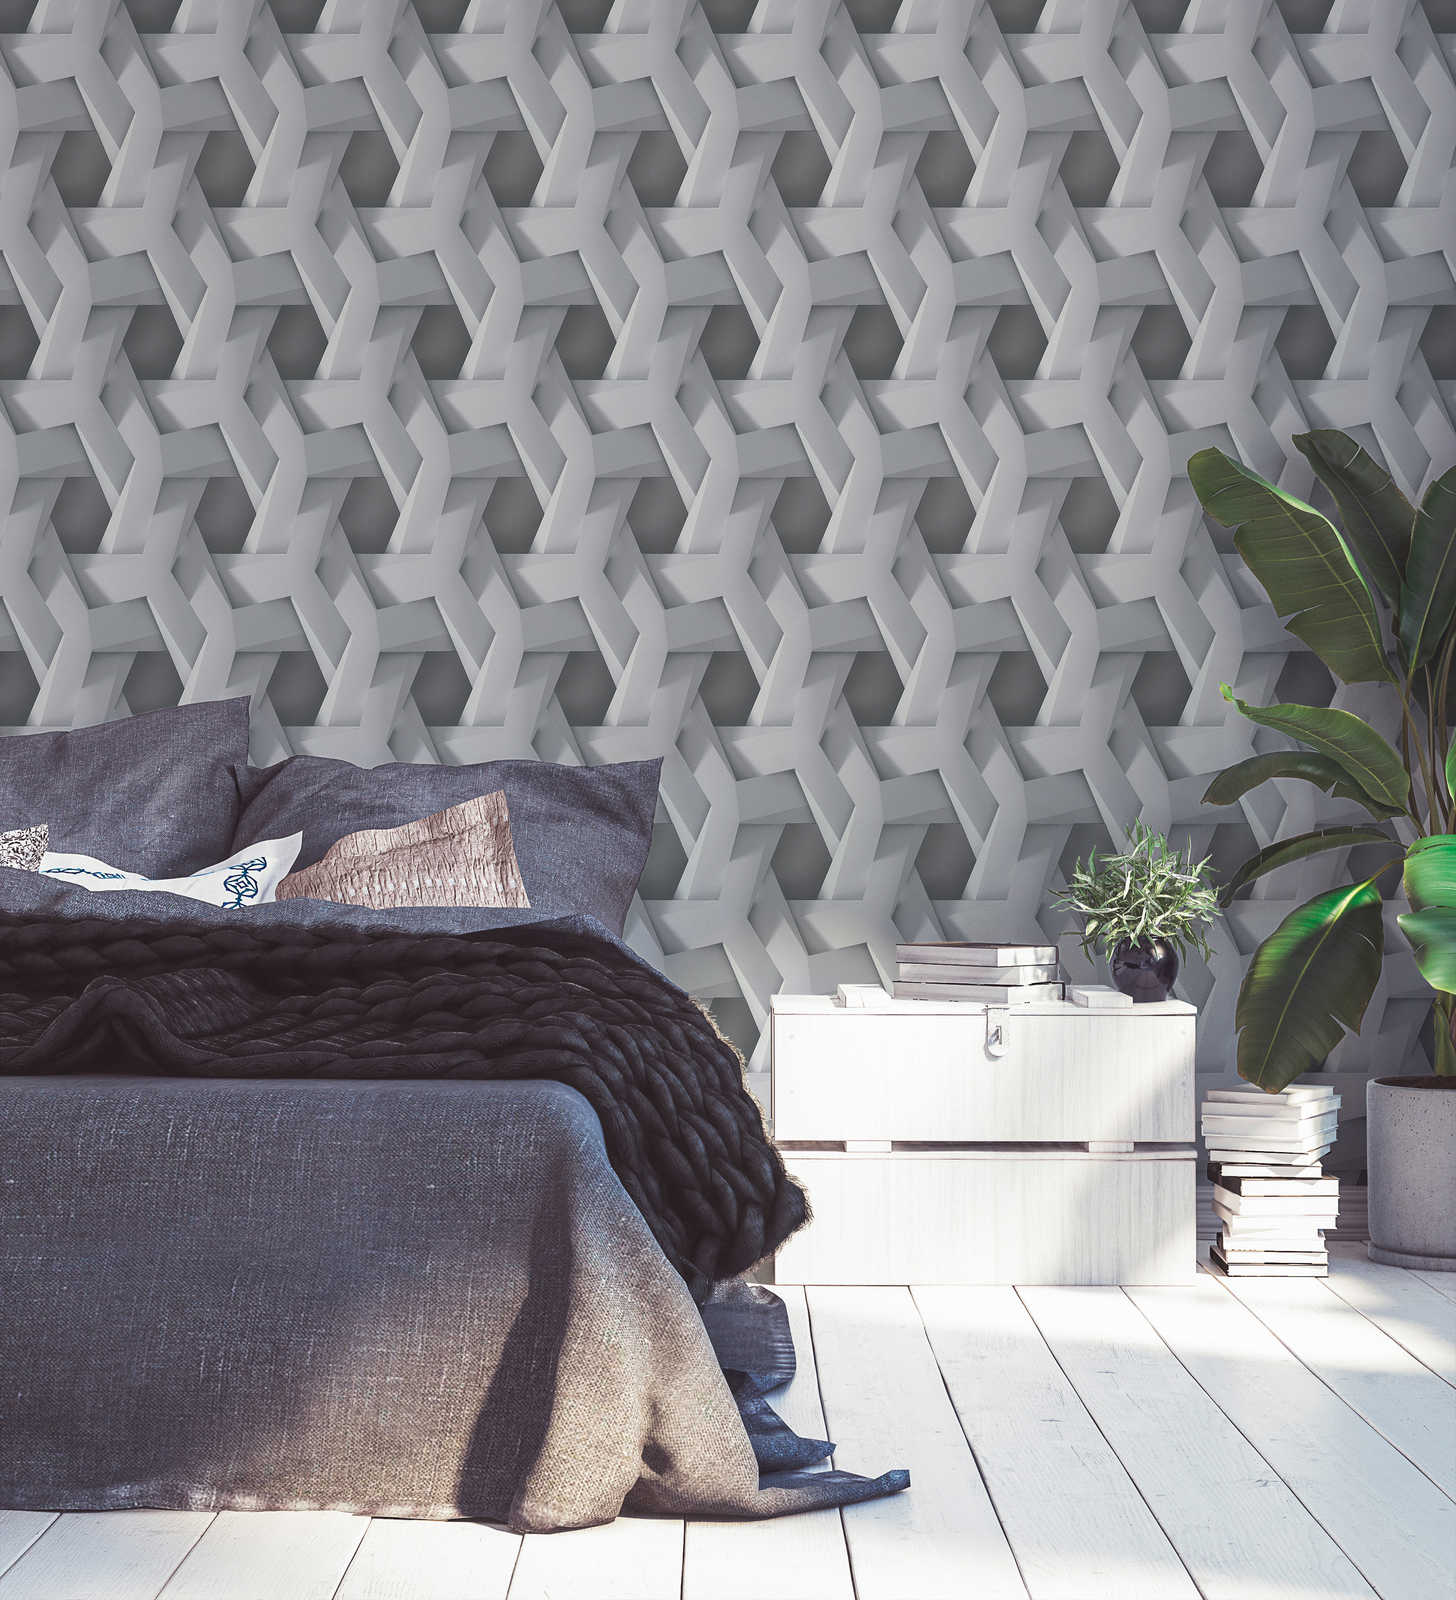             3D wallpaper grey graphic pattern with concrete look - grey
        